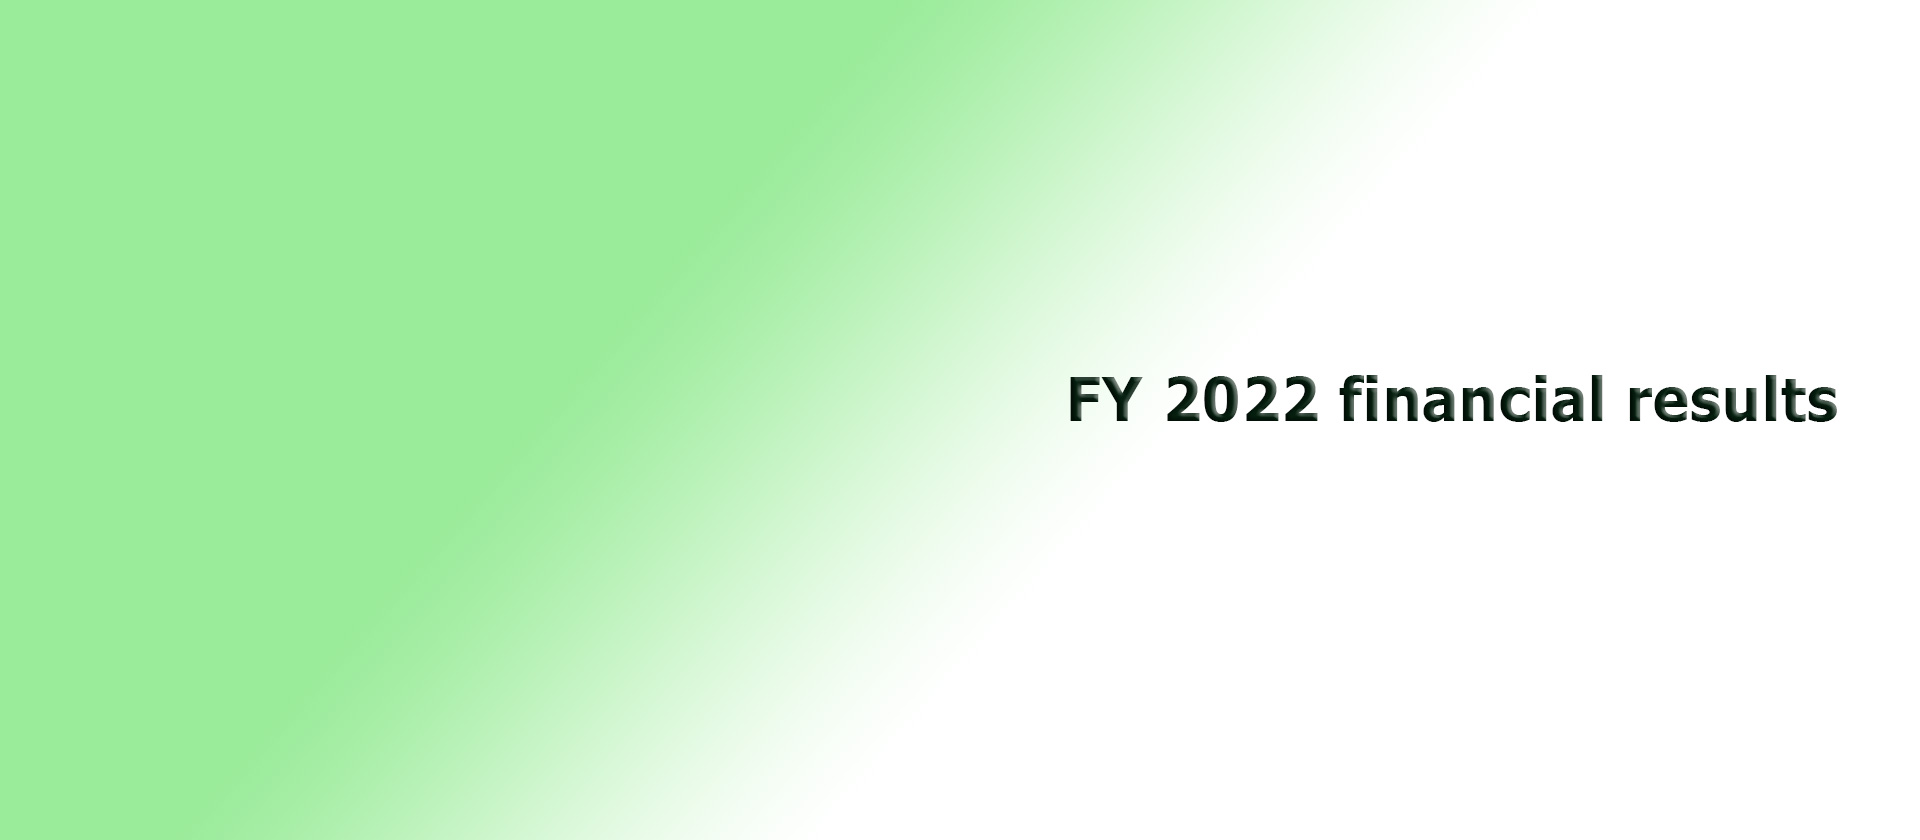 FY 2022 financial results